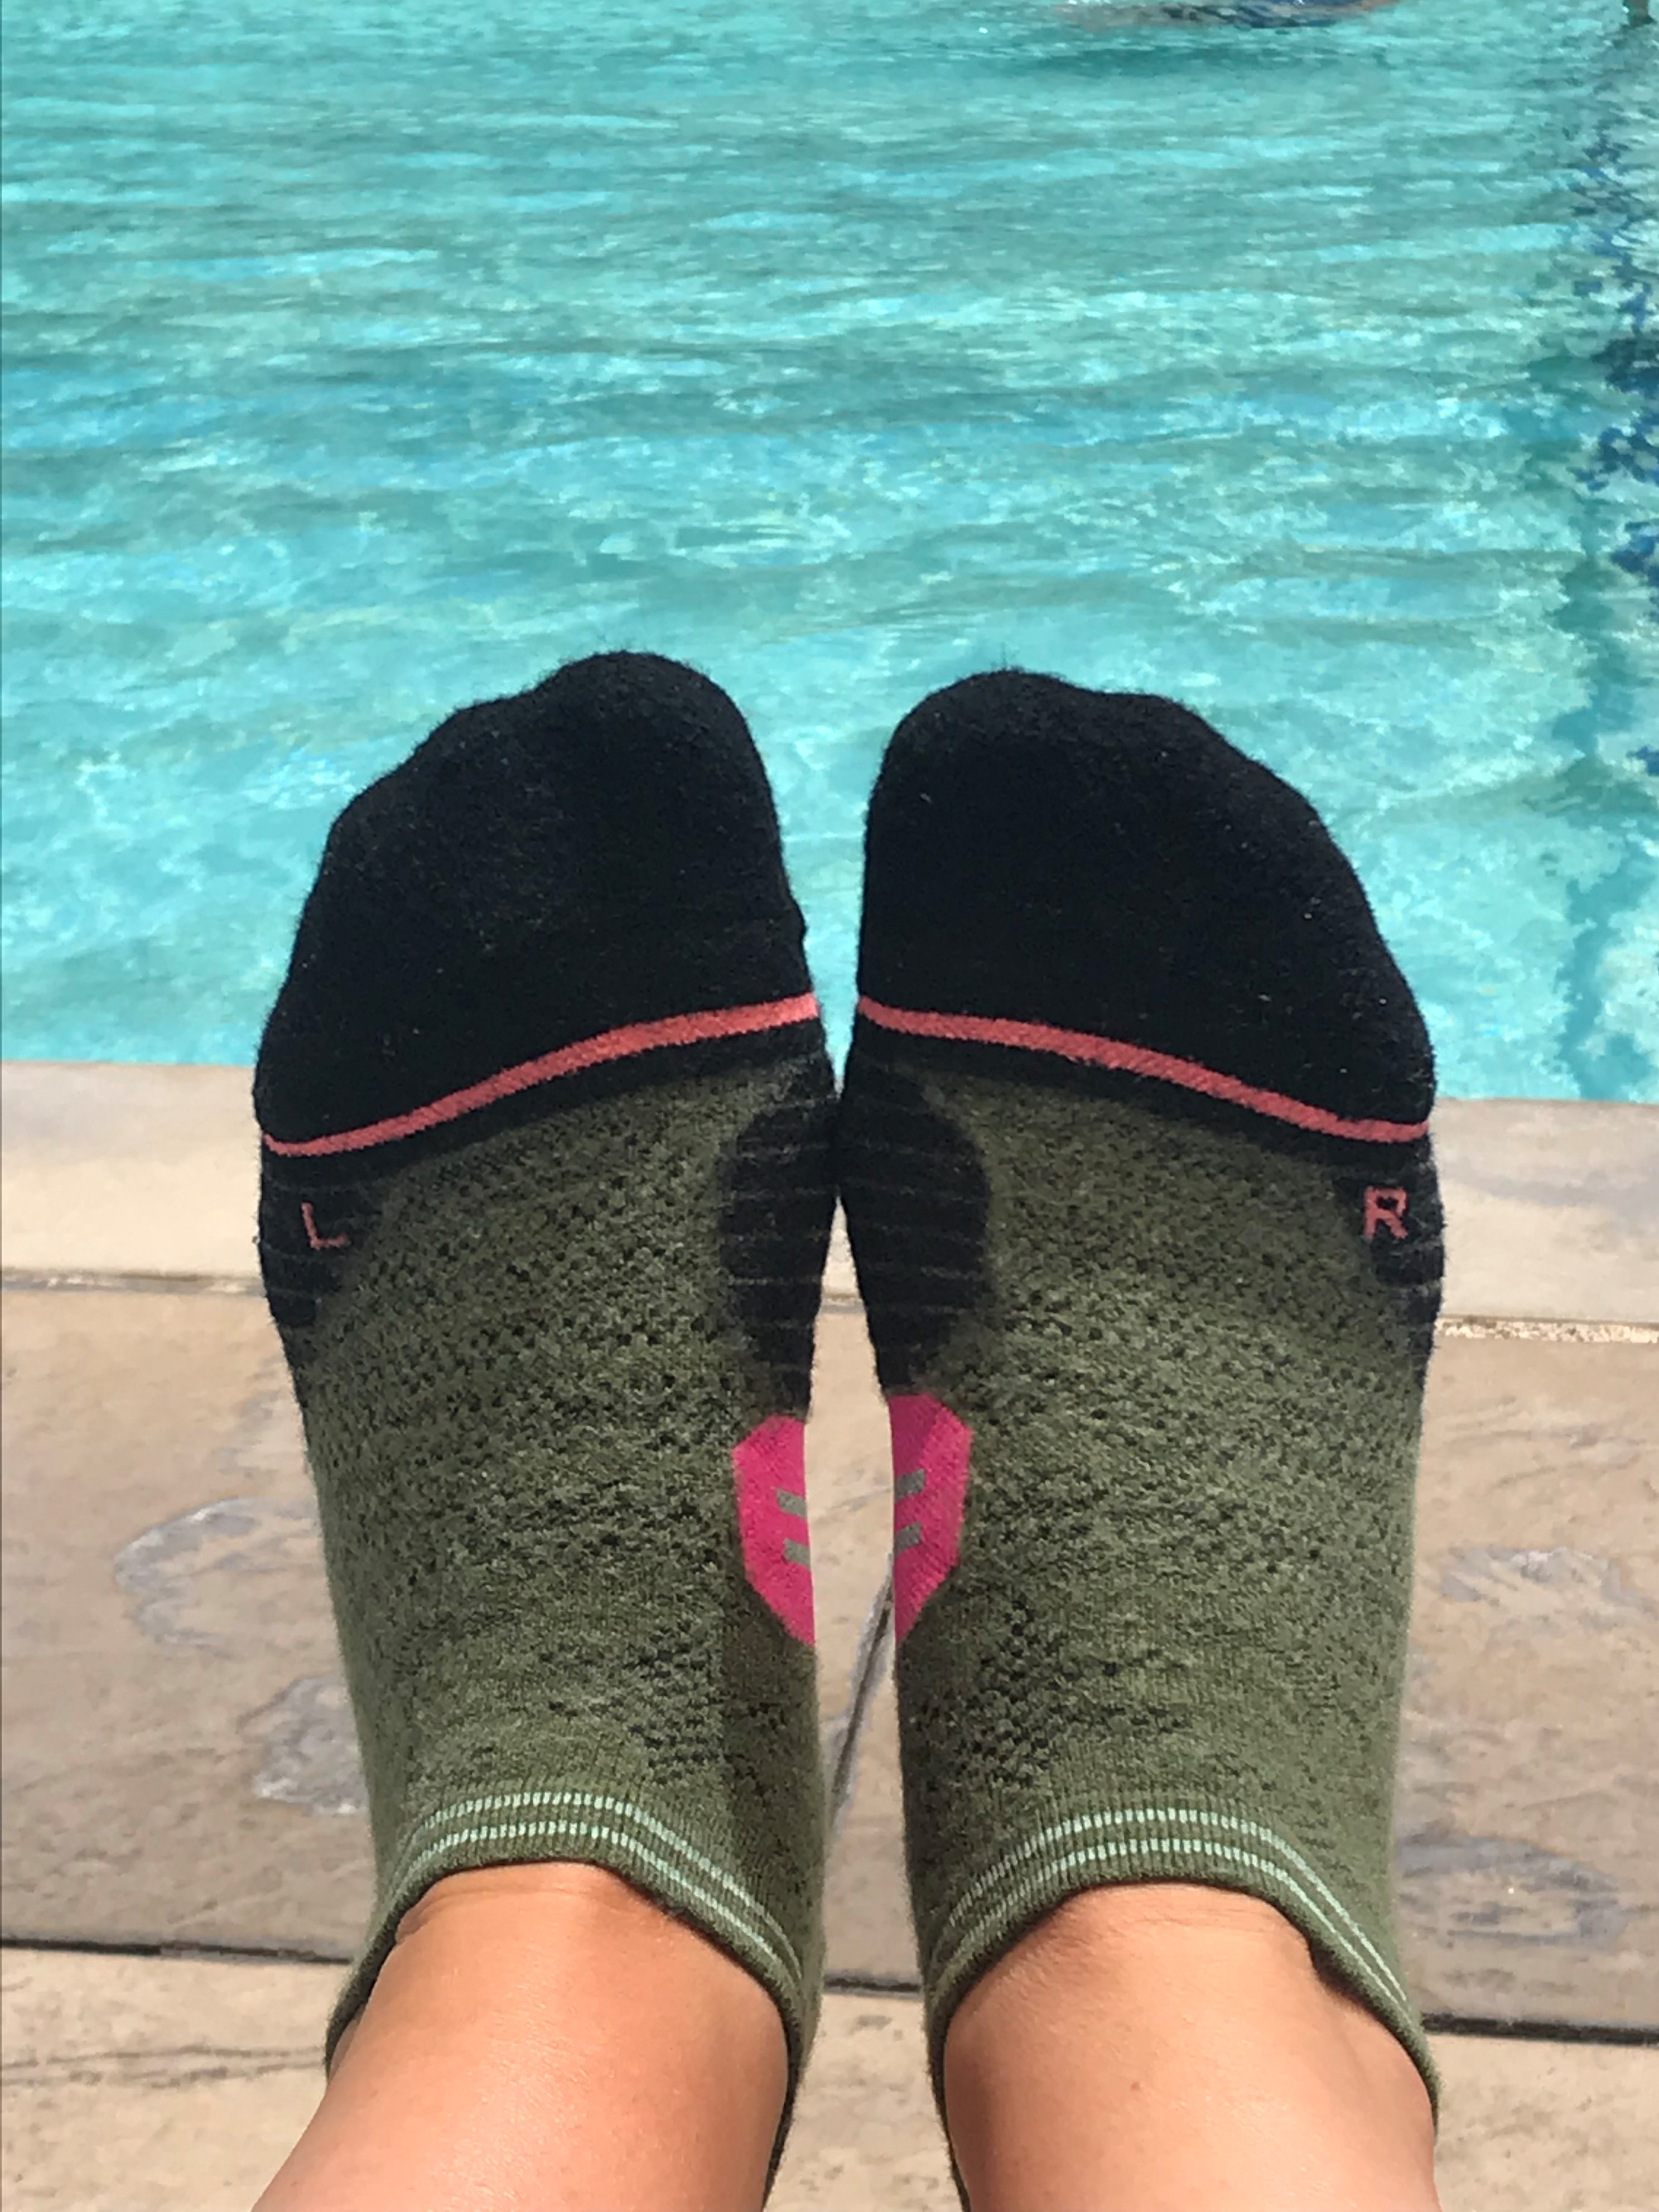 Product Review: Stance Socks - The 